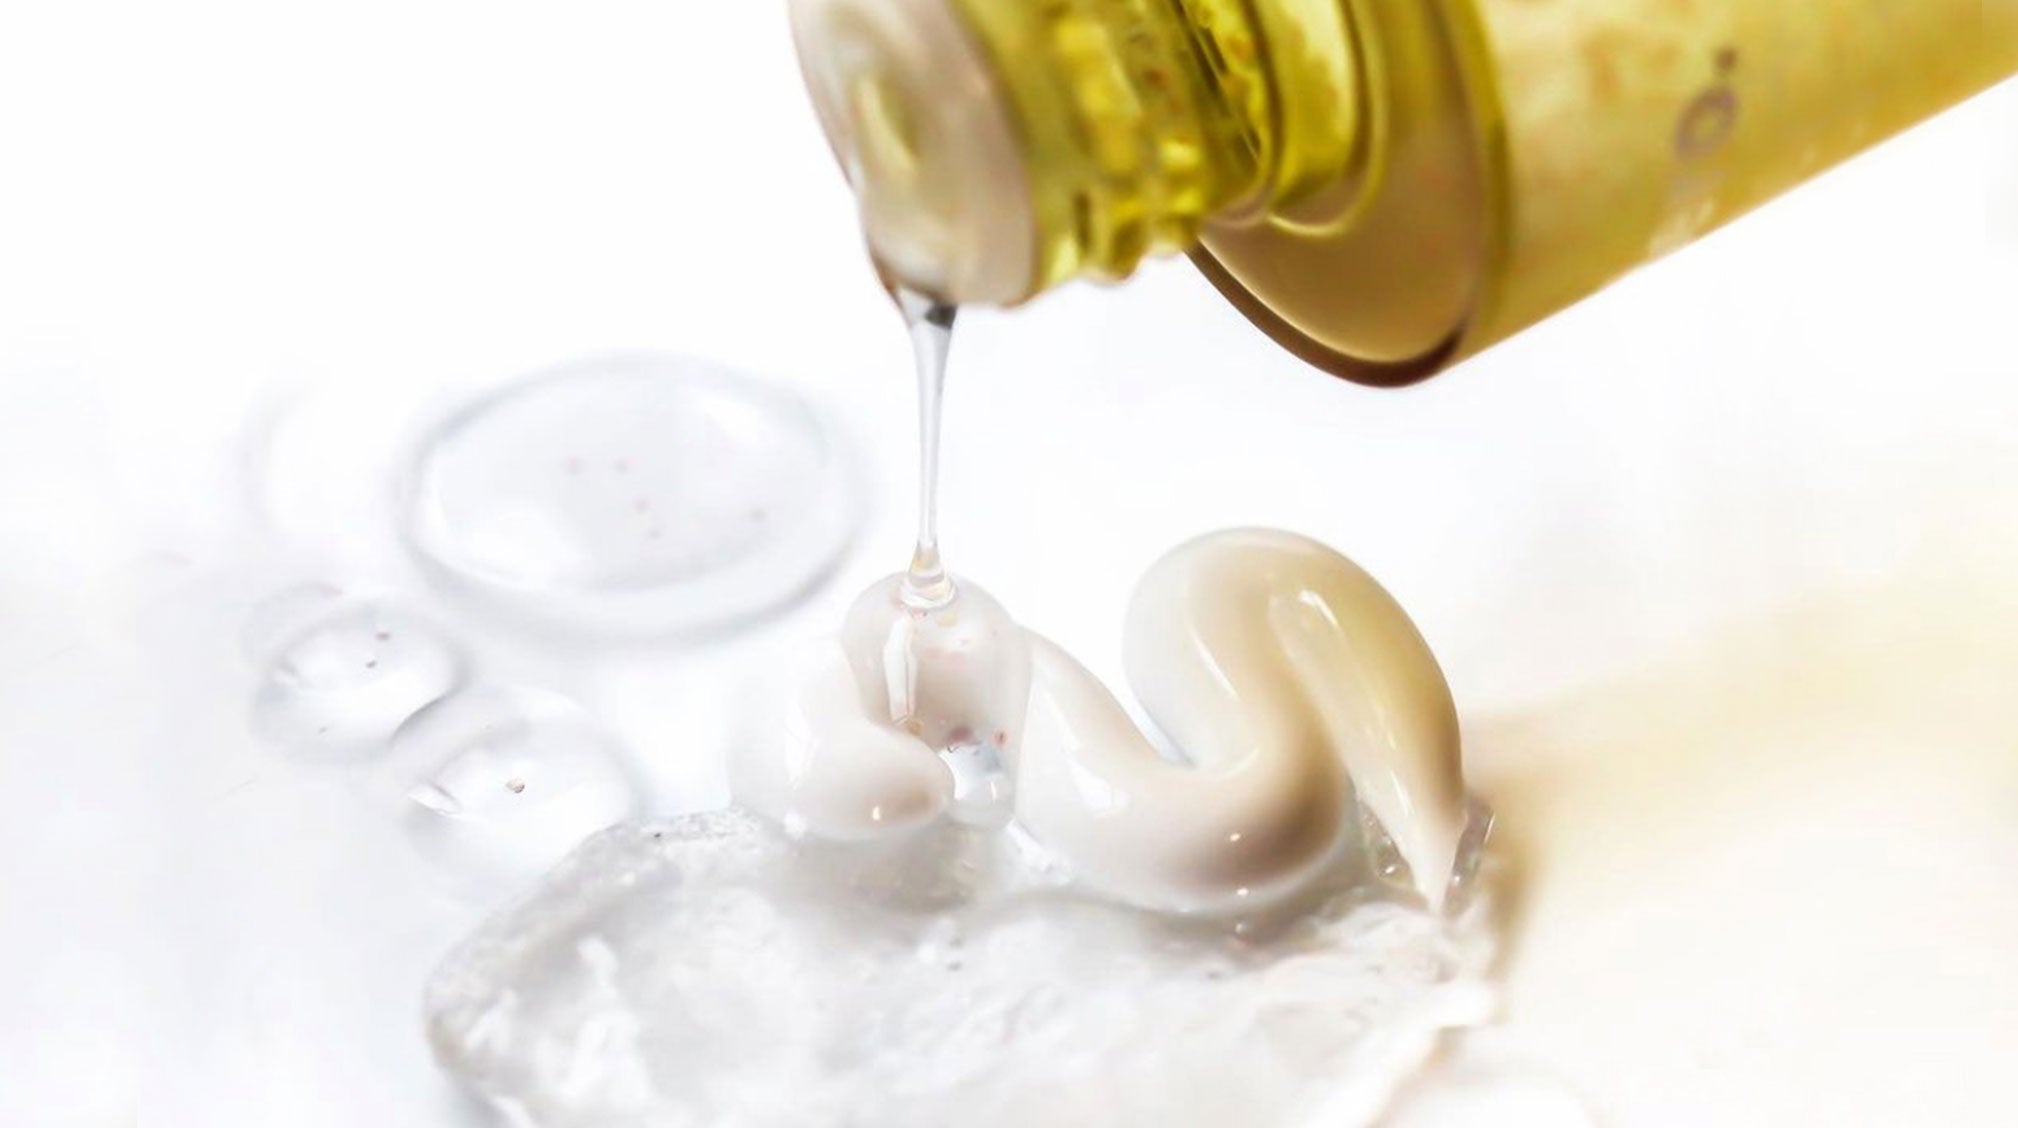 A Useful Guide to Chemical Exfoliants: What are AHAs, BHAs and PHAs?